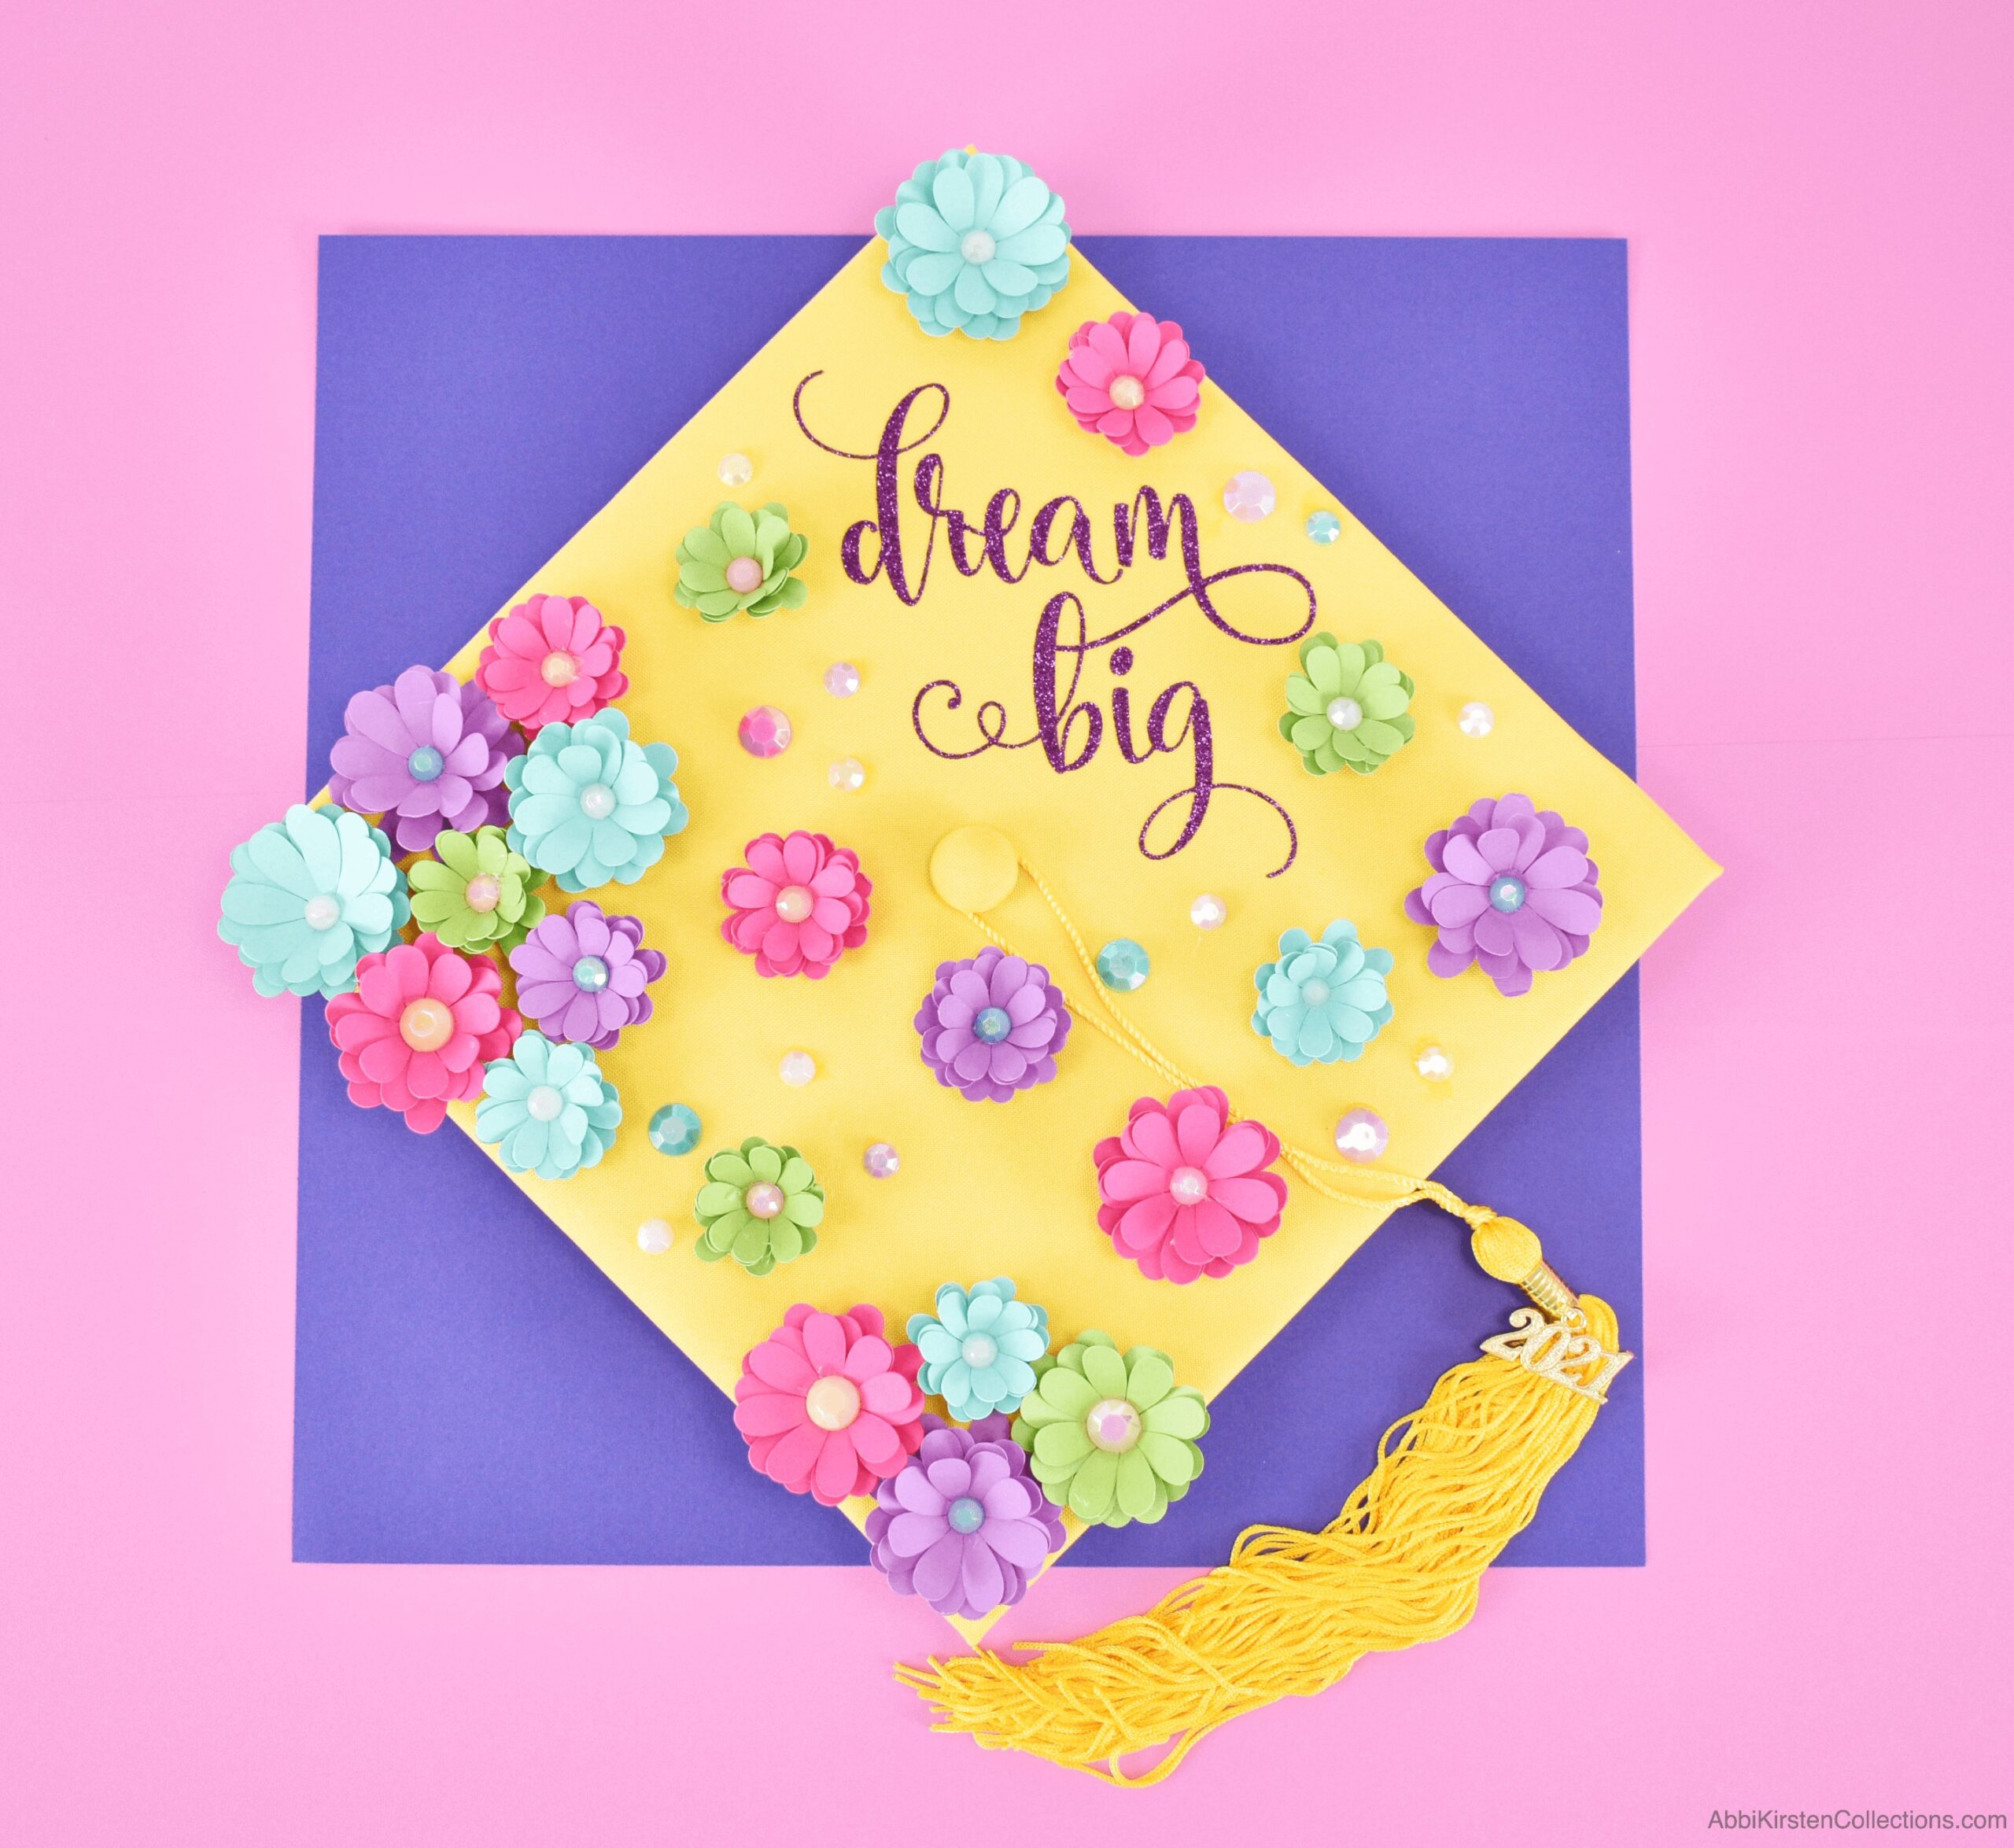 How to Decorate A Graduation Cap With Paper Flowers and Heat Transfer Vinyl